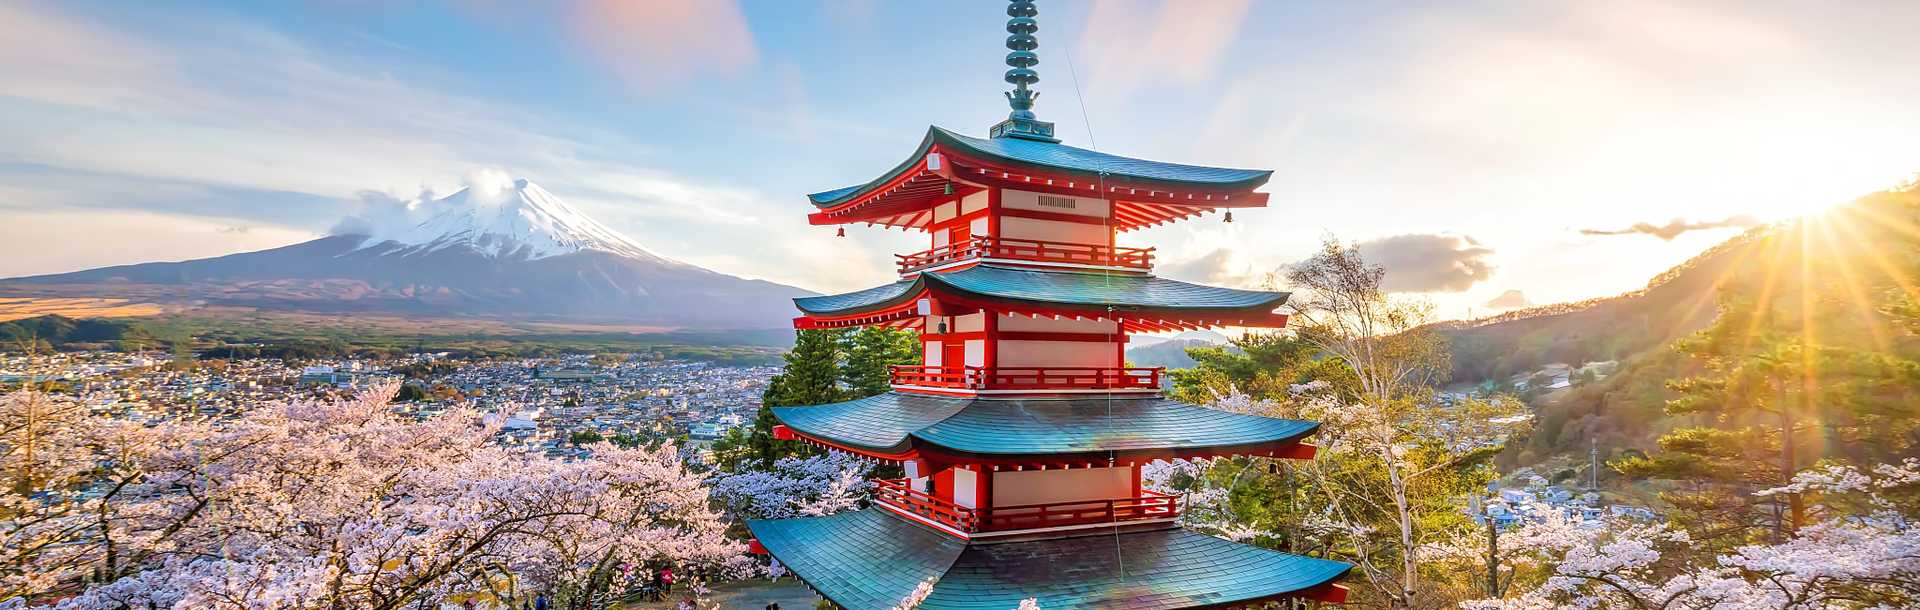 Mountain Fuji and Chureito red pagoda with cherry blossom during Spring in Japan.